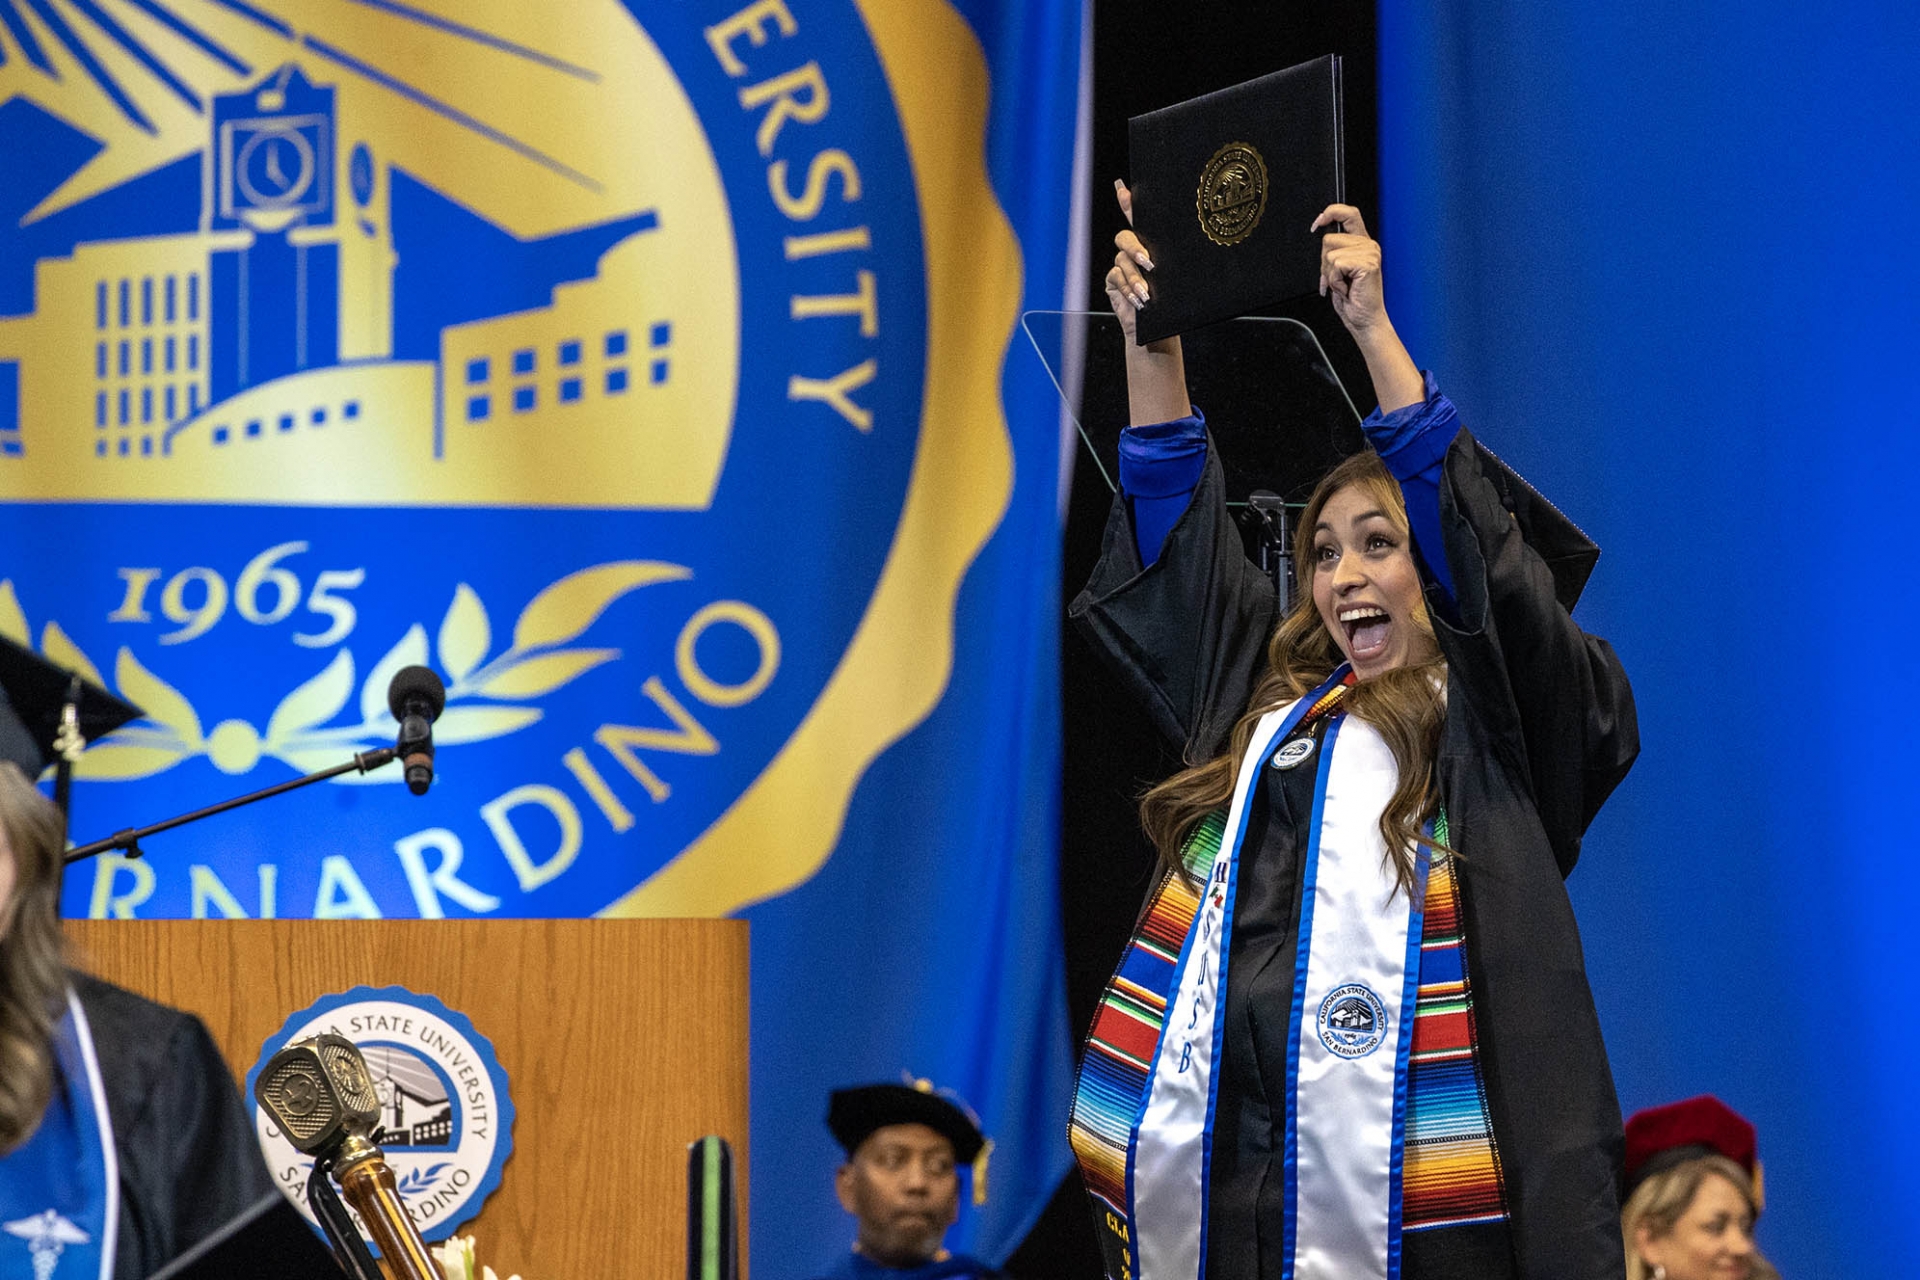 A student celebrates at fall 2022 commencement.